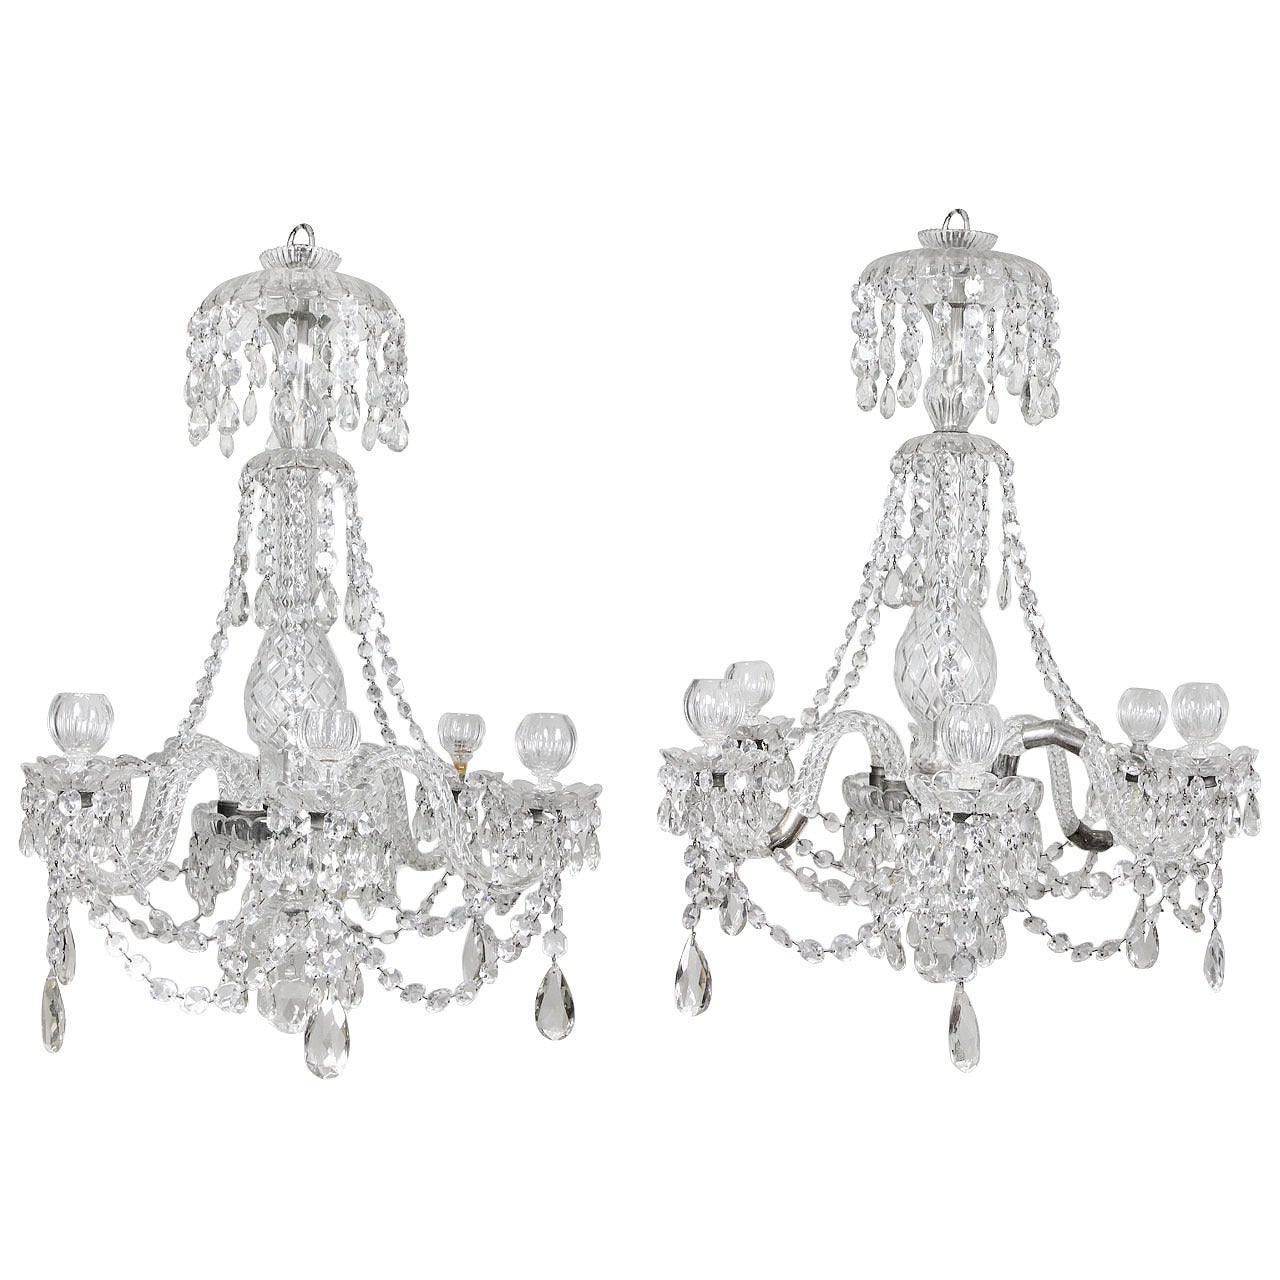 Pair of Anglo Irish Cut Glass Chandeliers